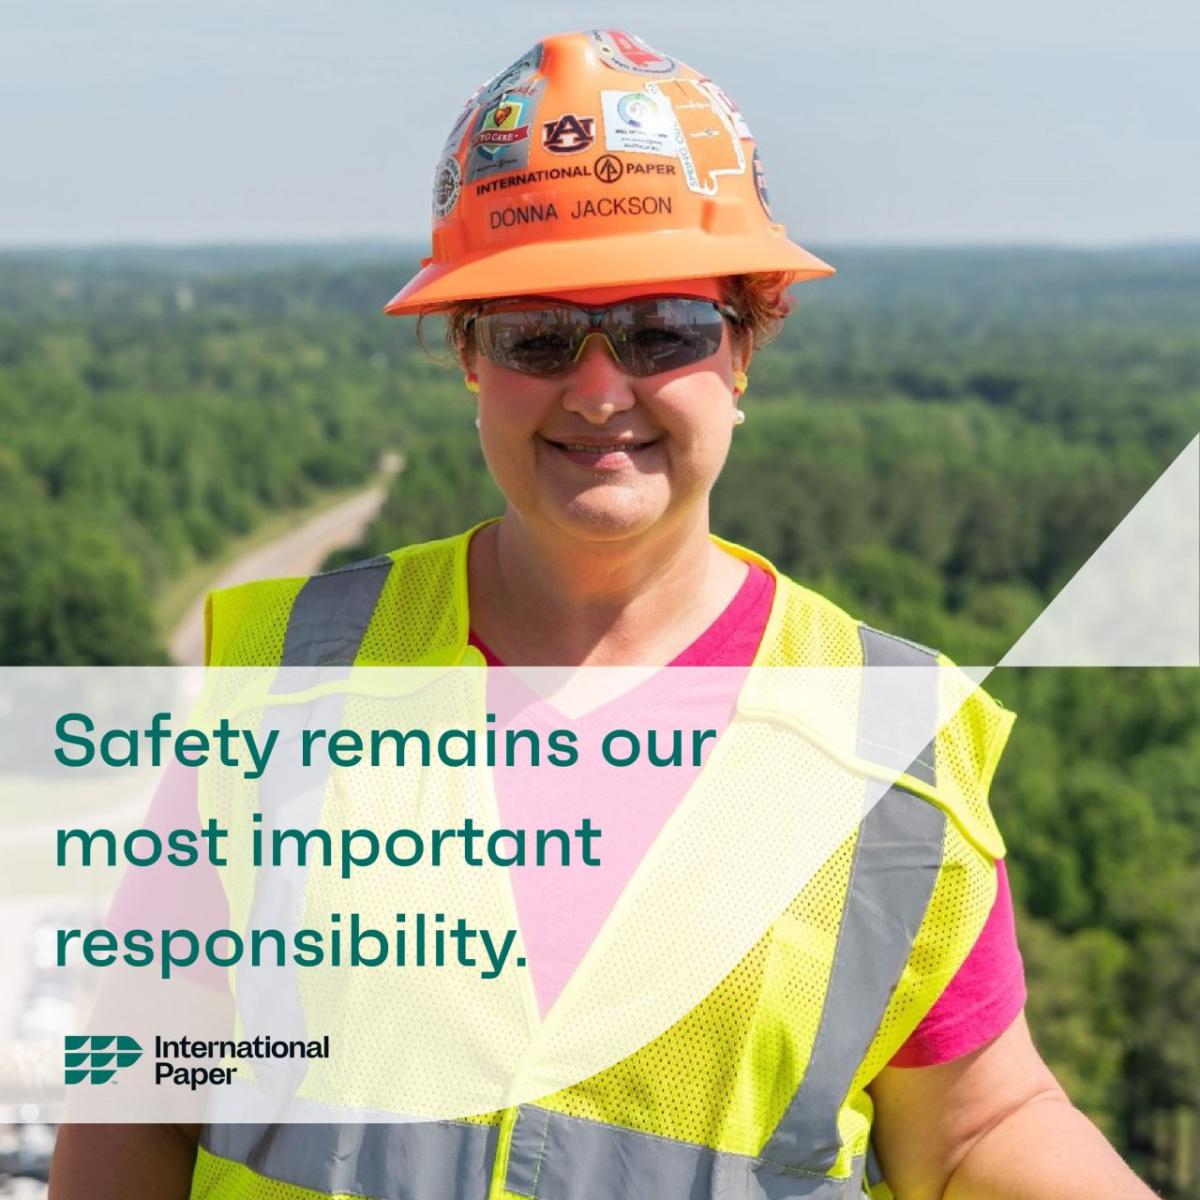 "Safety remains our most important responsibility"